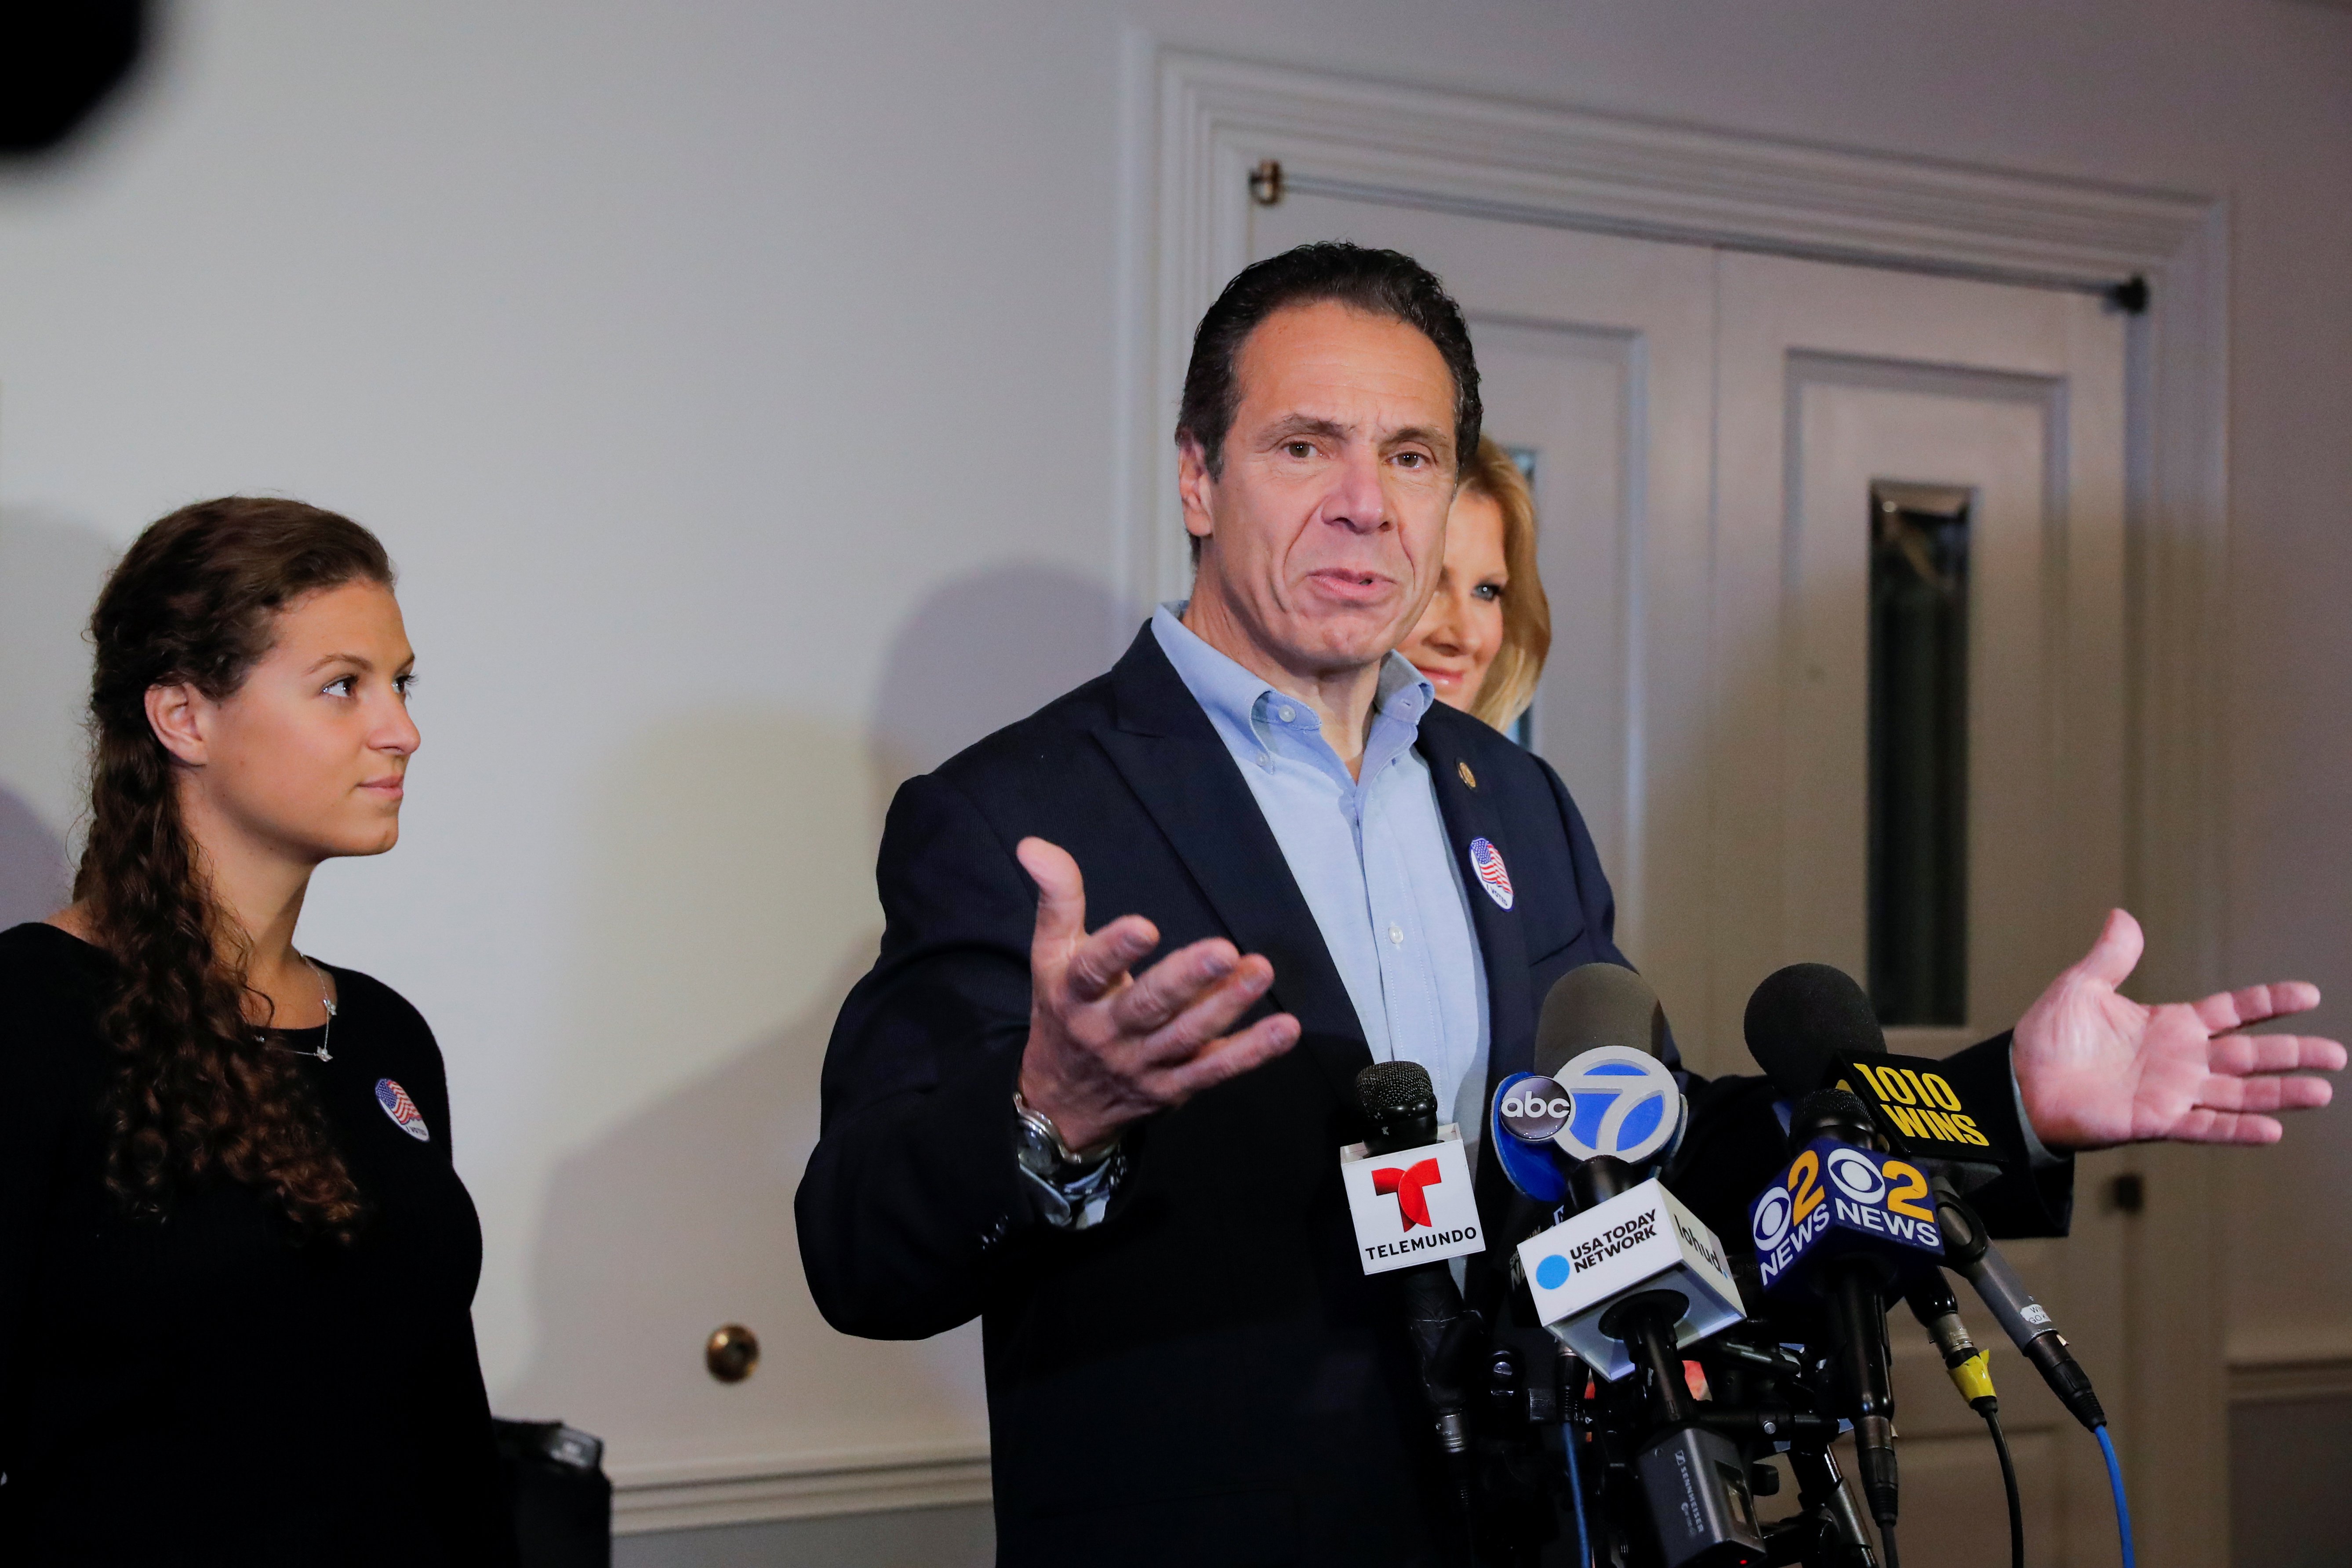 Democratic New York Governor Andrew Cuomo gives a news conference after voting for the midterm elections, at the Presbyterian Church in Mt. Kisco, New York, U.S., November 6, 2018. Standing next to him are his girlfriend Sandra Lee (R) and his daughter Cara Kennedy Cuomo. REUTERS/Caitlin Ochs